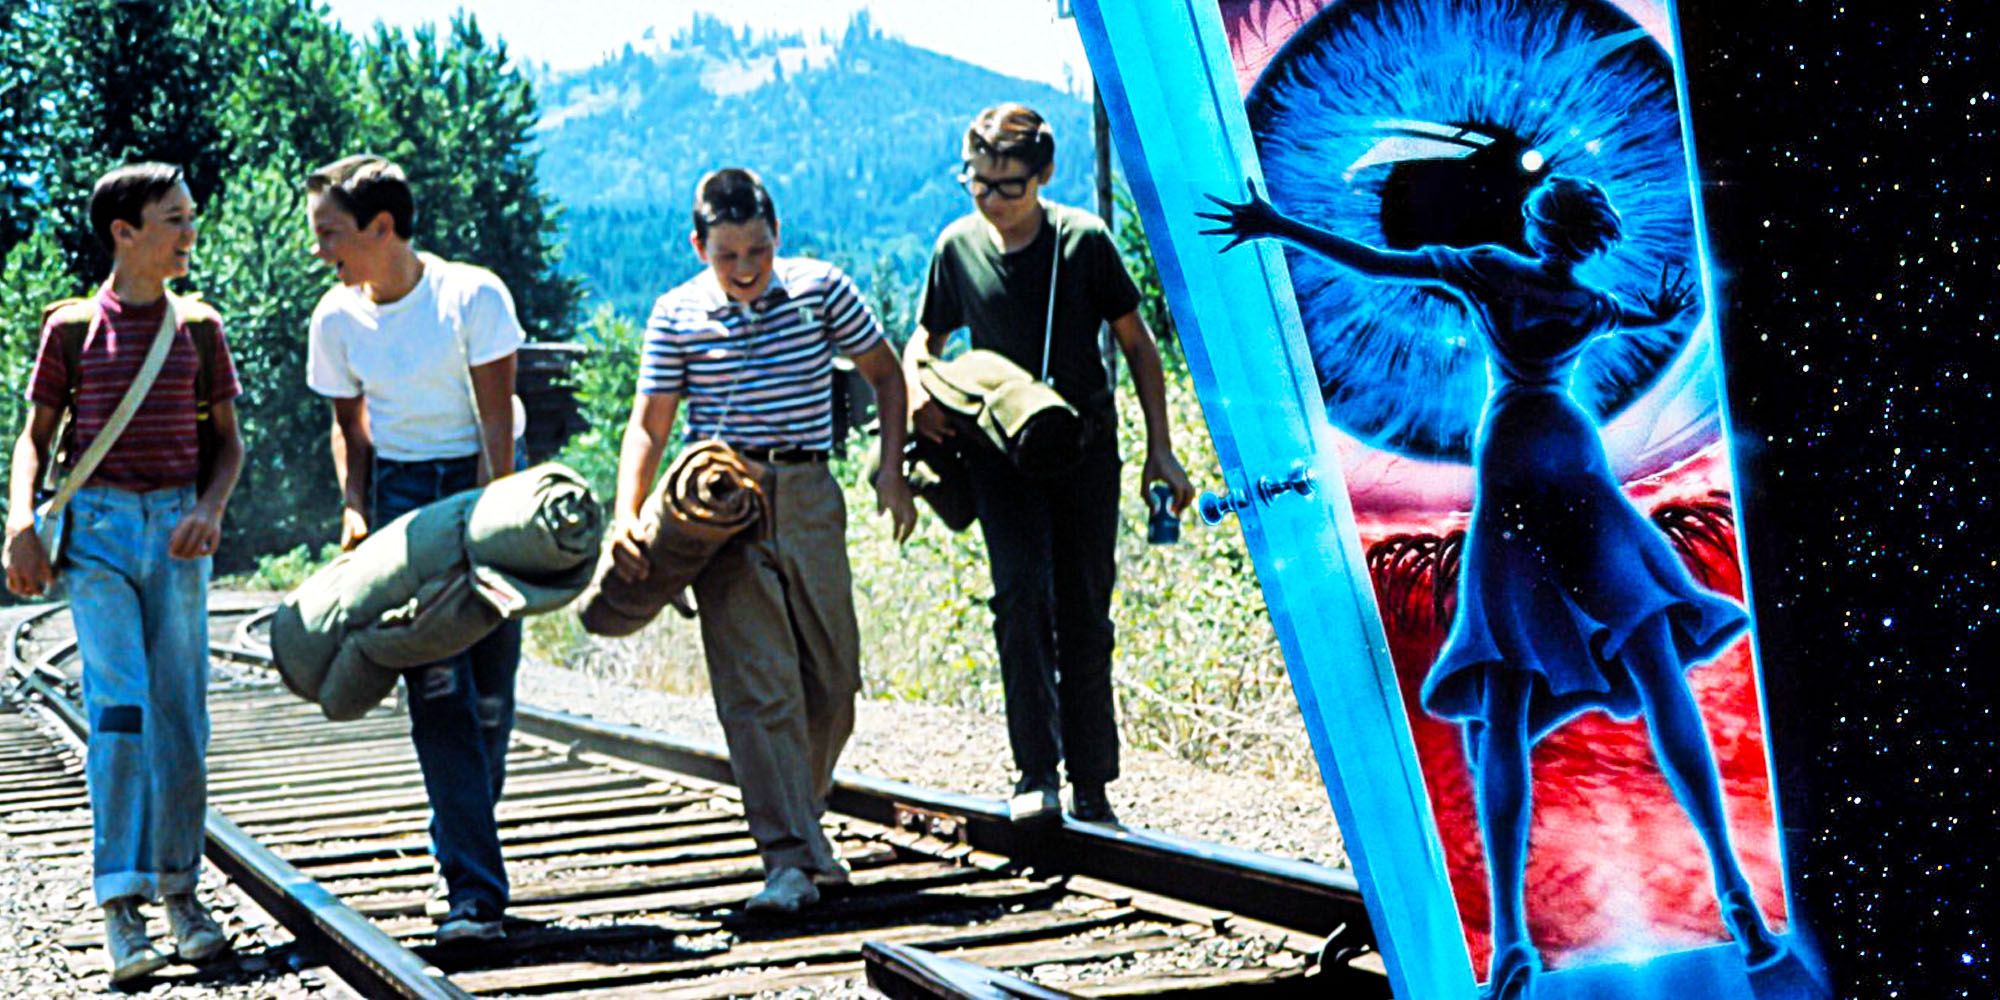 The Twilight Zone movie tragedy impacted Stand by me